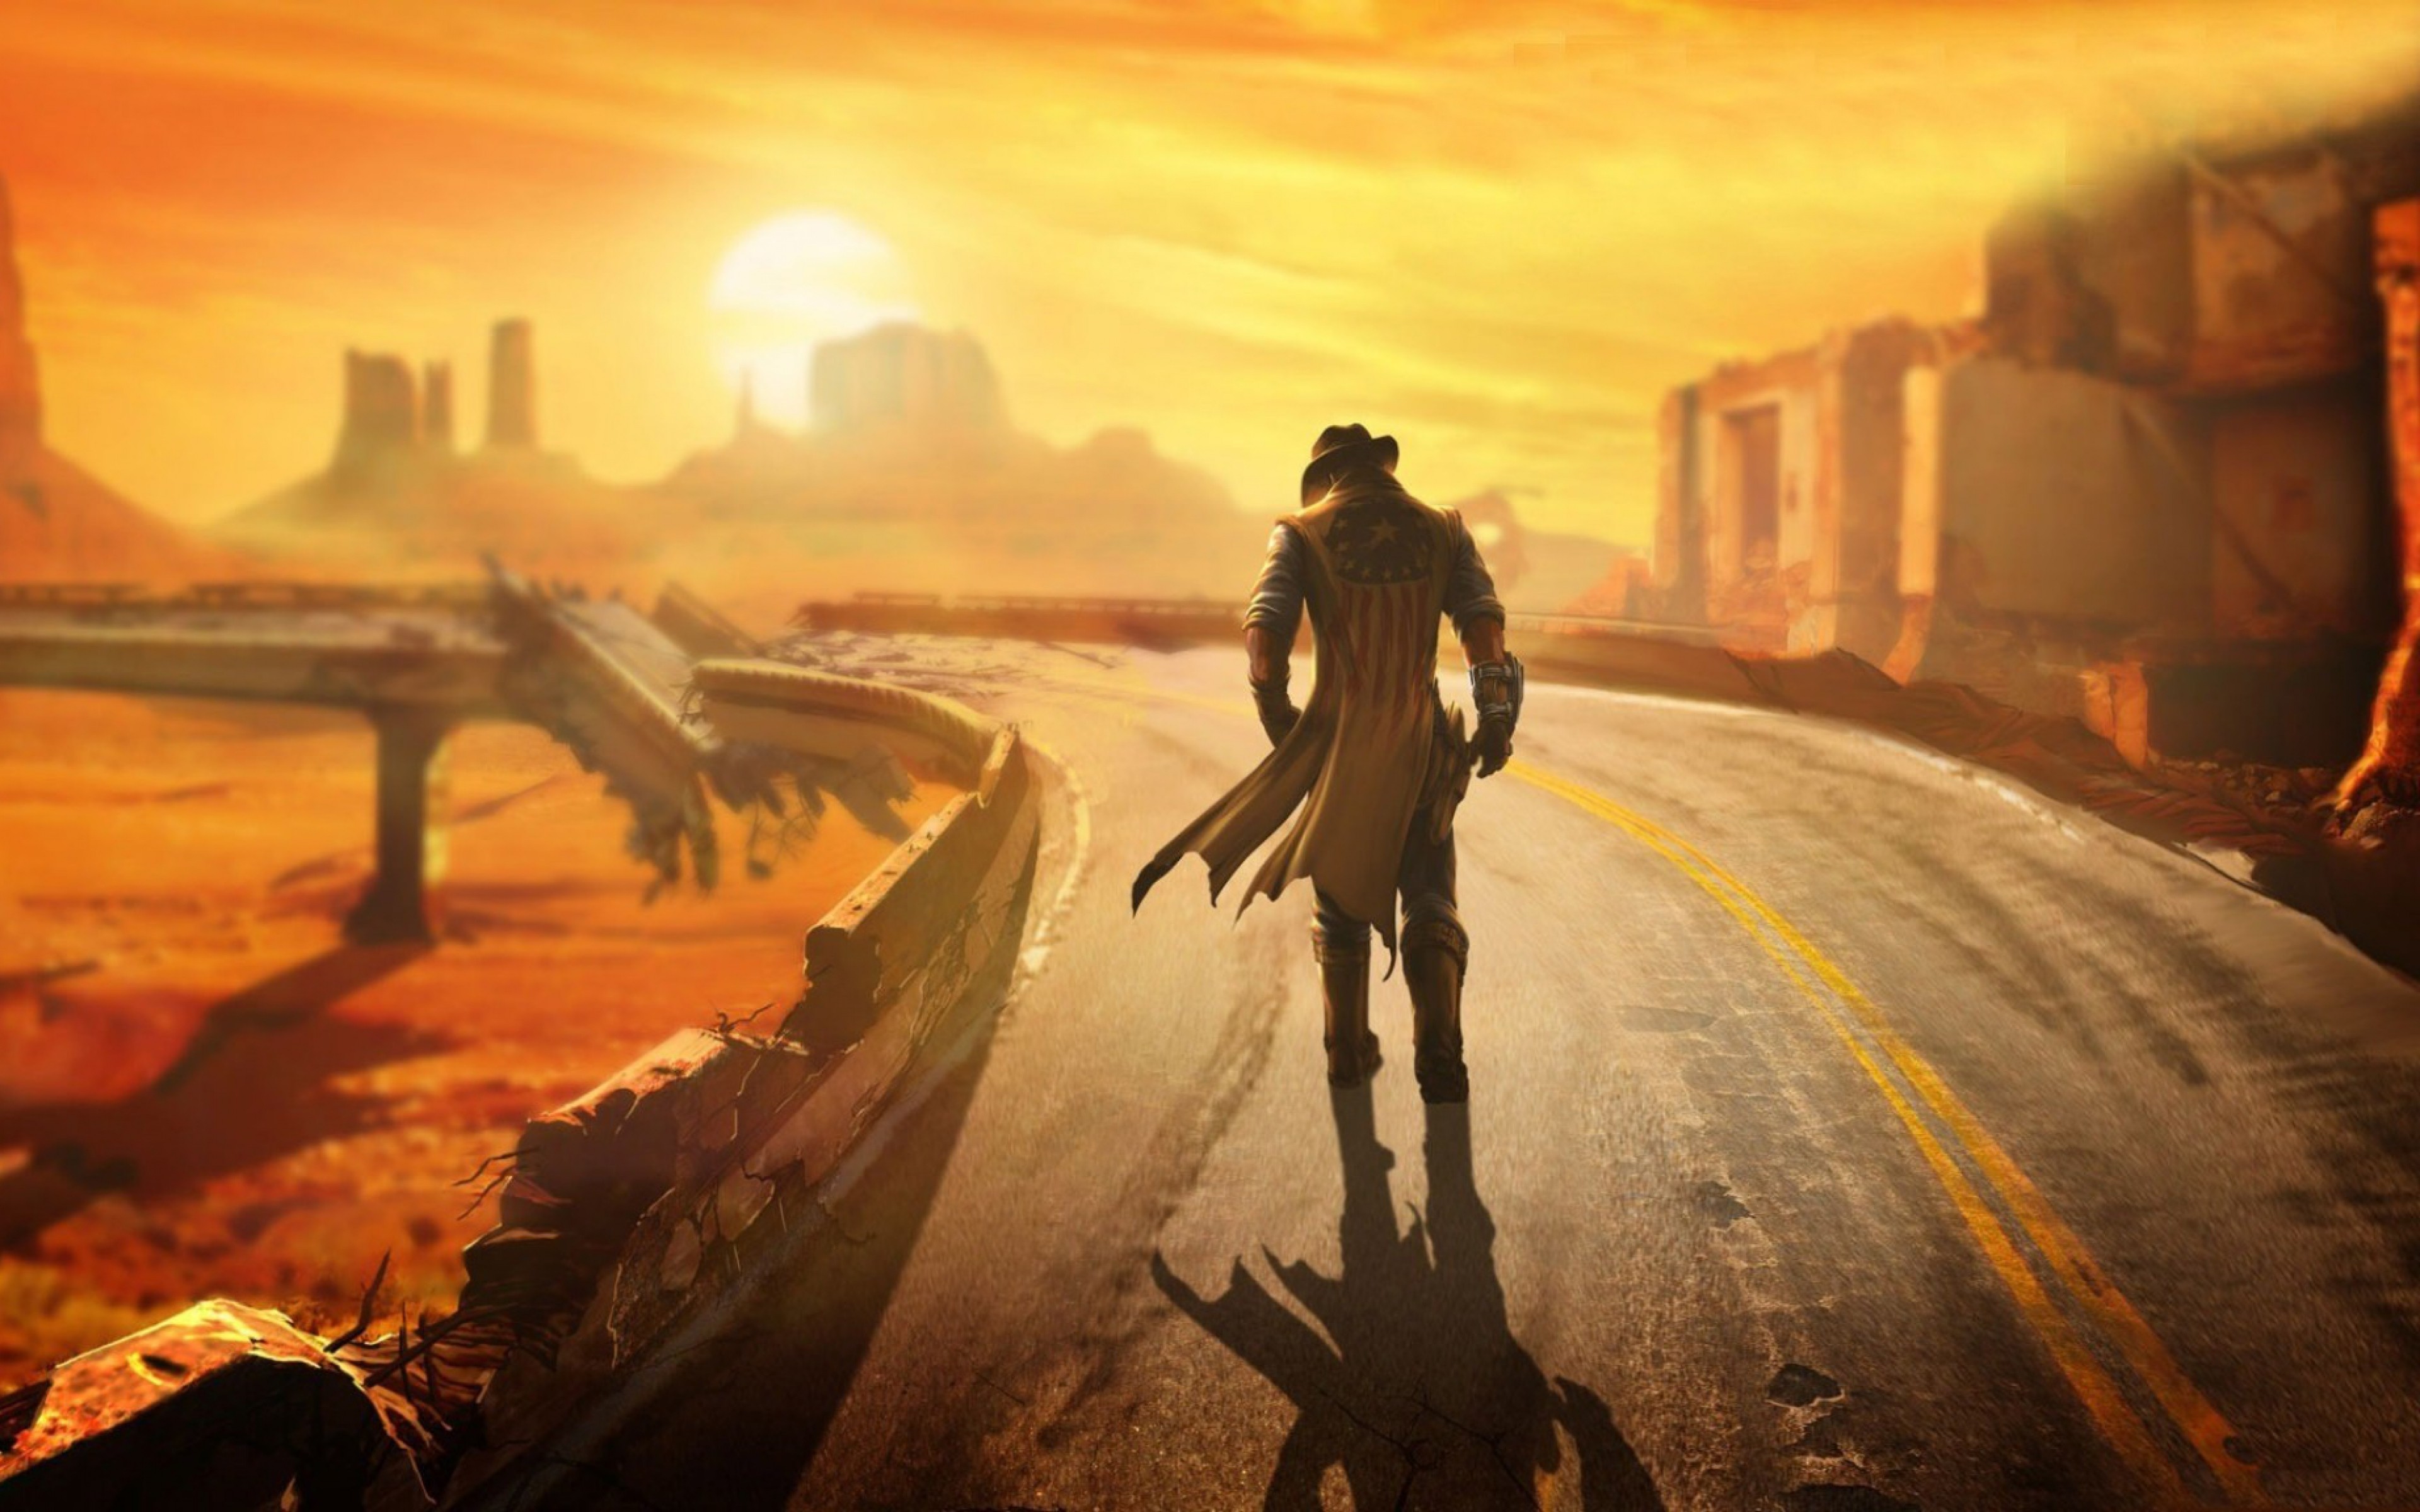 video game characters, Video games, Fallout: New Vegas, Lonesome Road, Fallout Wallpaper